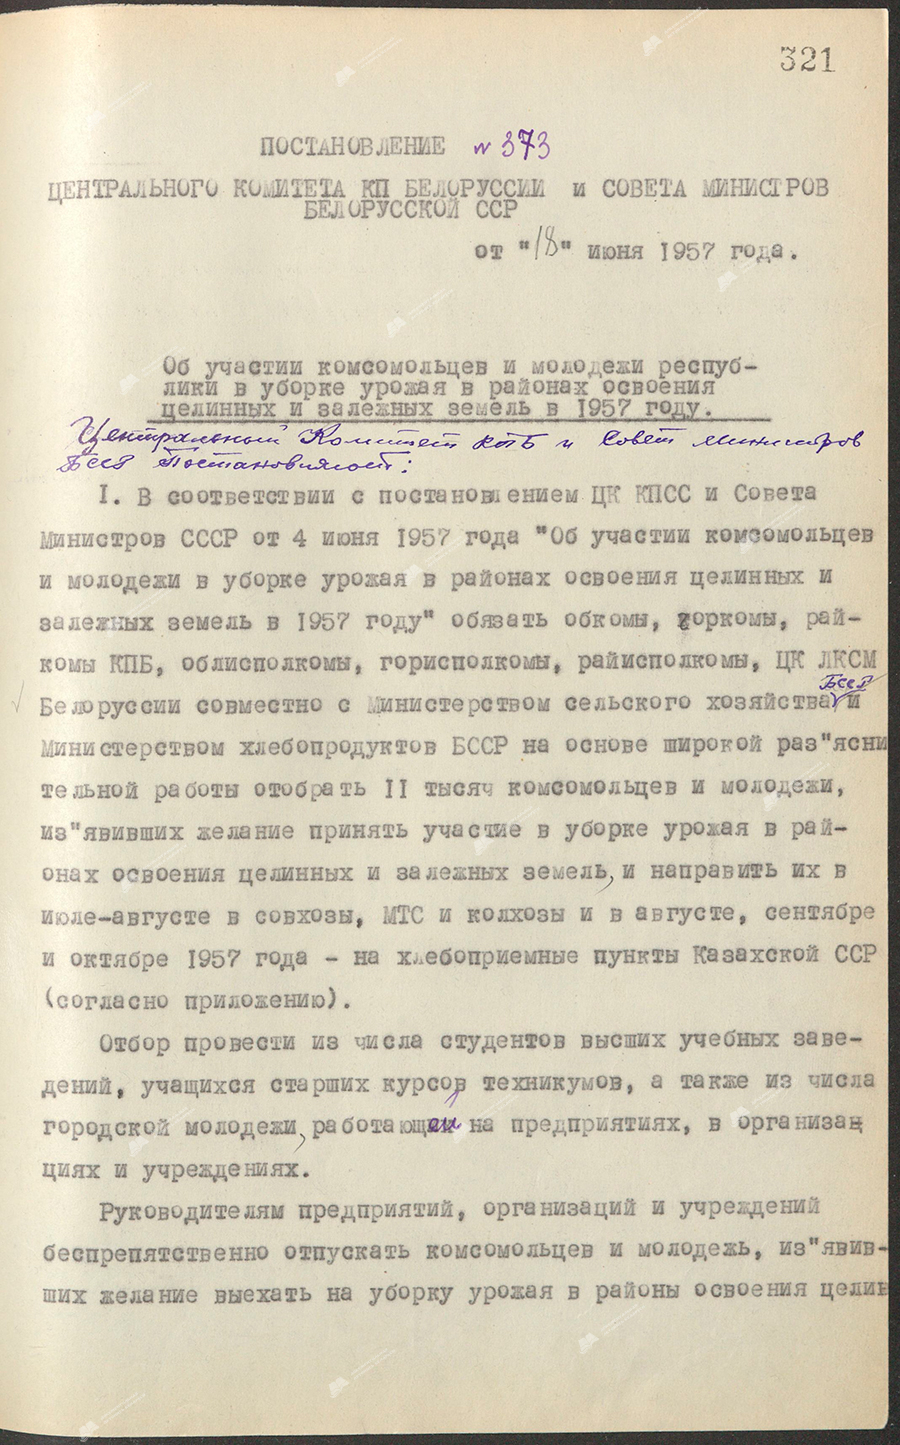 Resolution No. 373 of the Central Committee of the Communist Party of Belarus and the Council of Ministers of the Belarusian SSR «On the participation of Komsomol members and youth of the republic in harvesting in areas of development of virgin and fallow lands in 1957»-с. 0